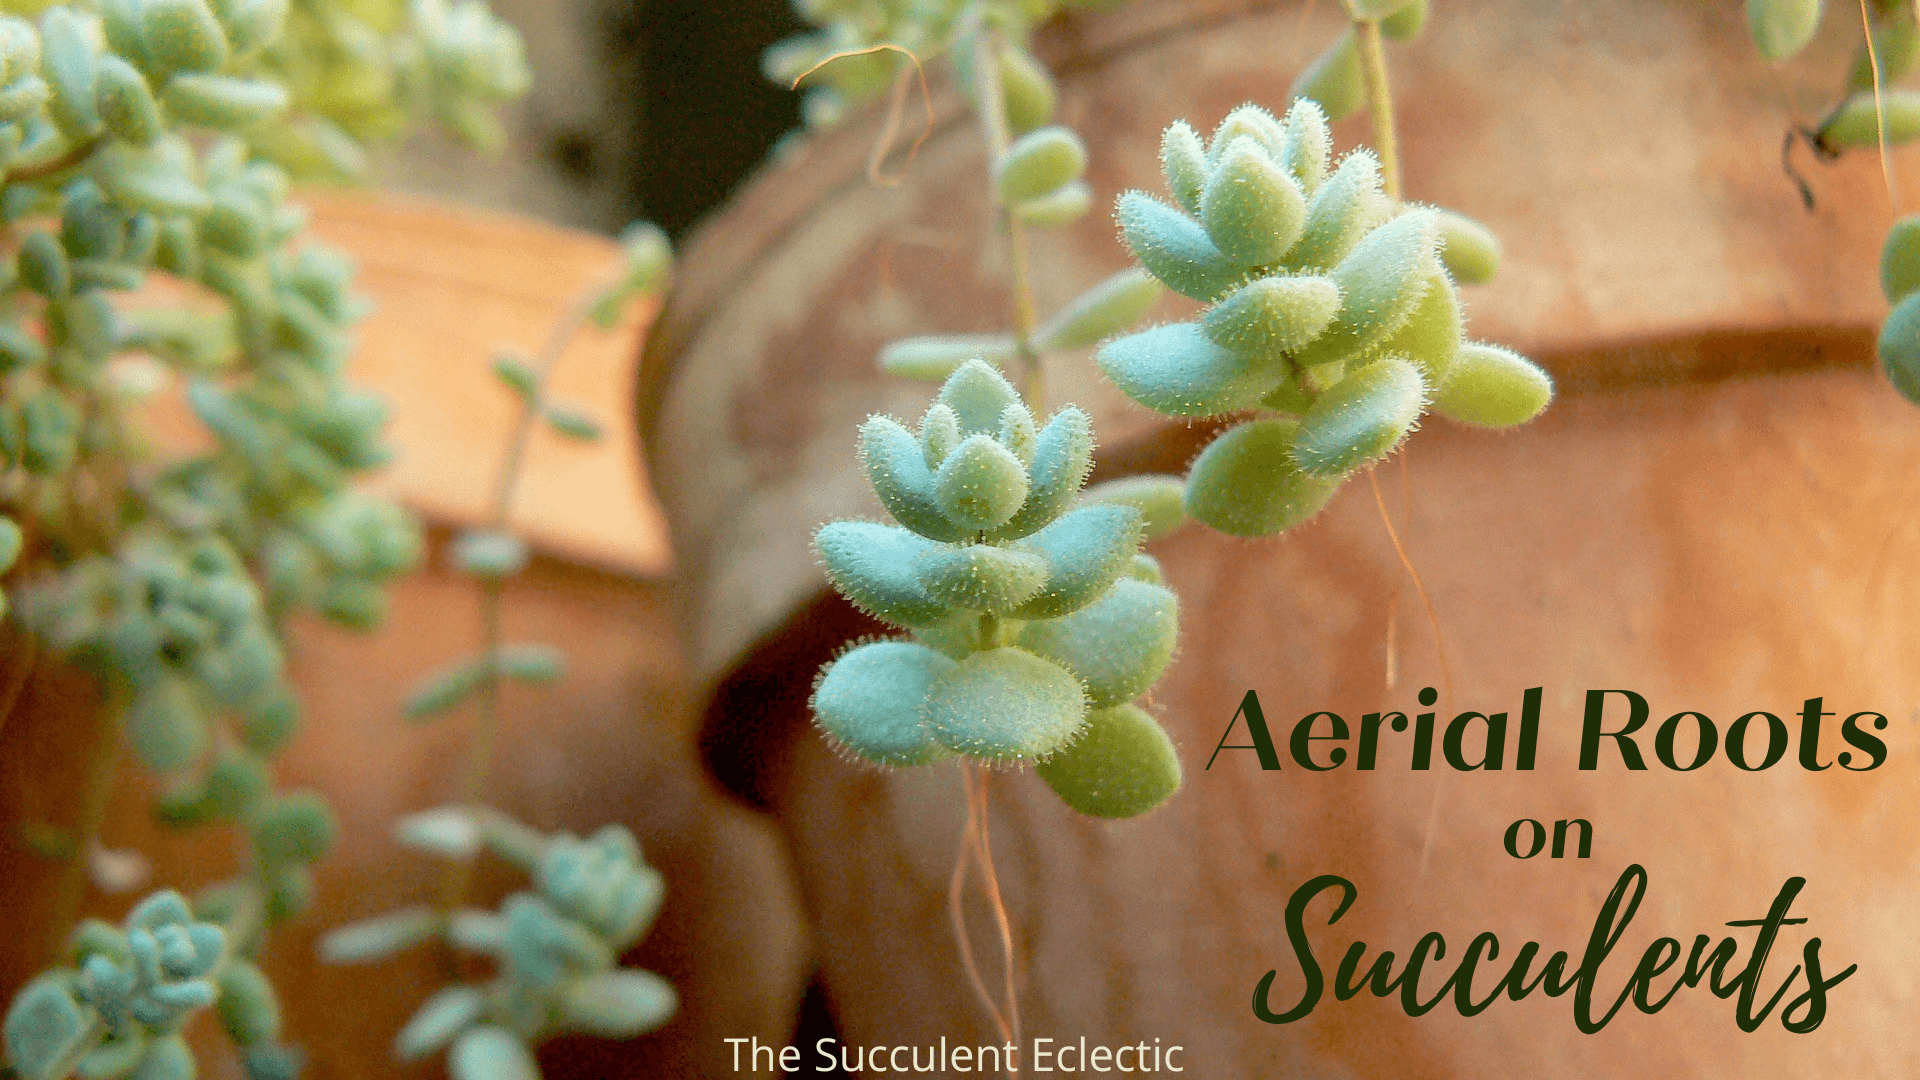 You are currently viewing Aerial Roots on Succulents